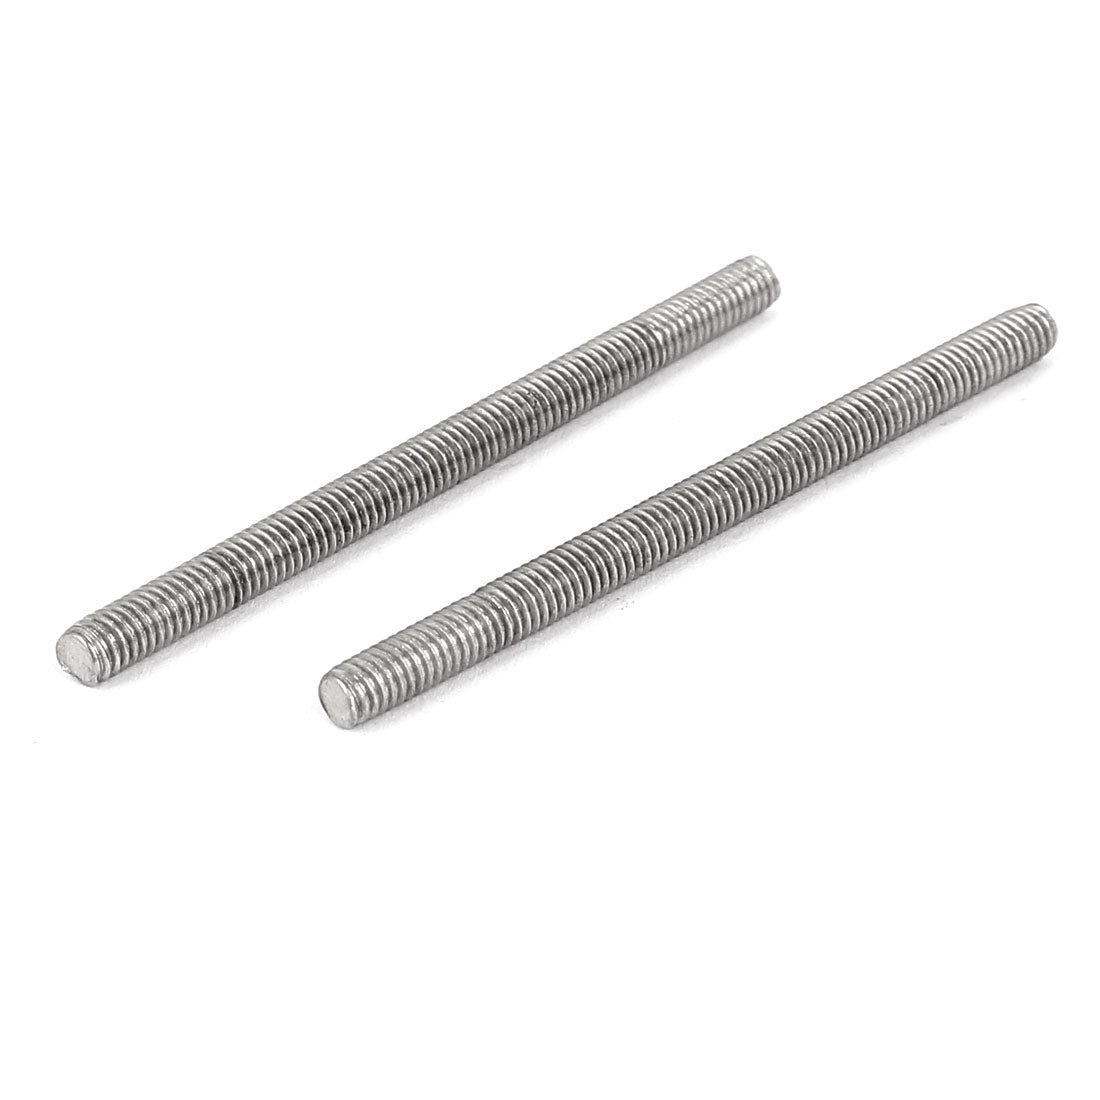 uxcell Uxcell M4 x 60mm 304 Stainless Steel Fully Threaded Rod Bar Studs Hardware 10 Pcs